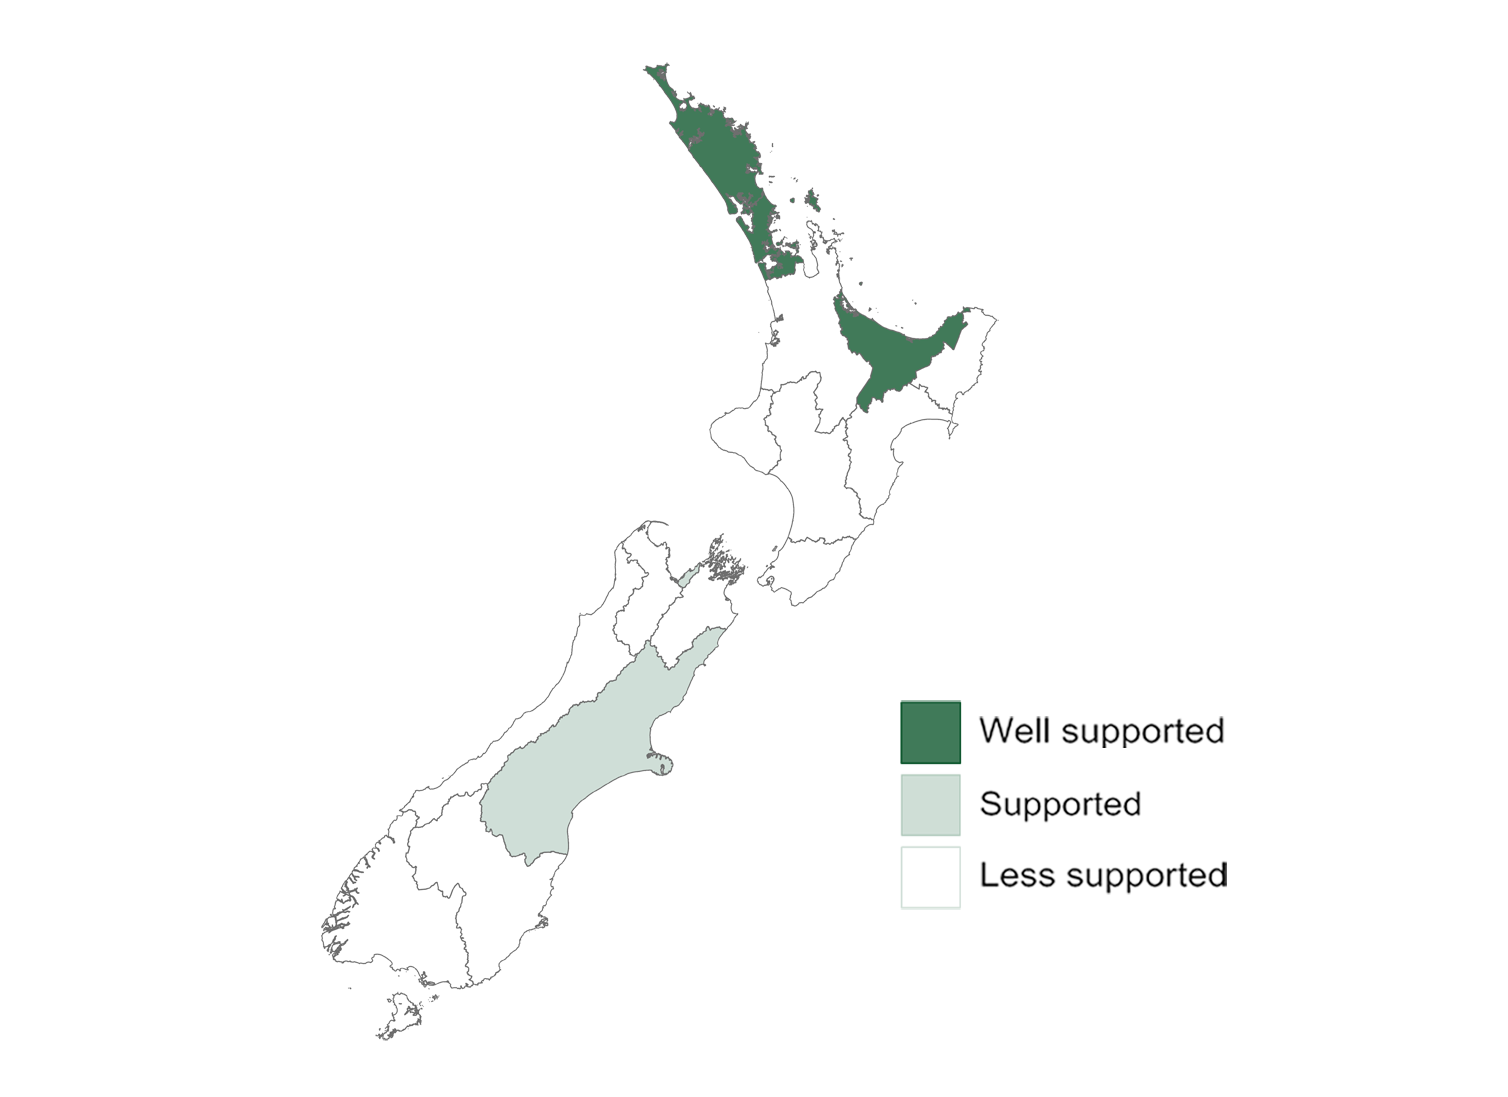 New Zealand map highlighting the best regions for commercial greenhouse tomato growing.